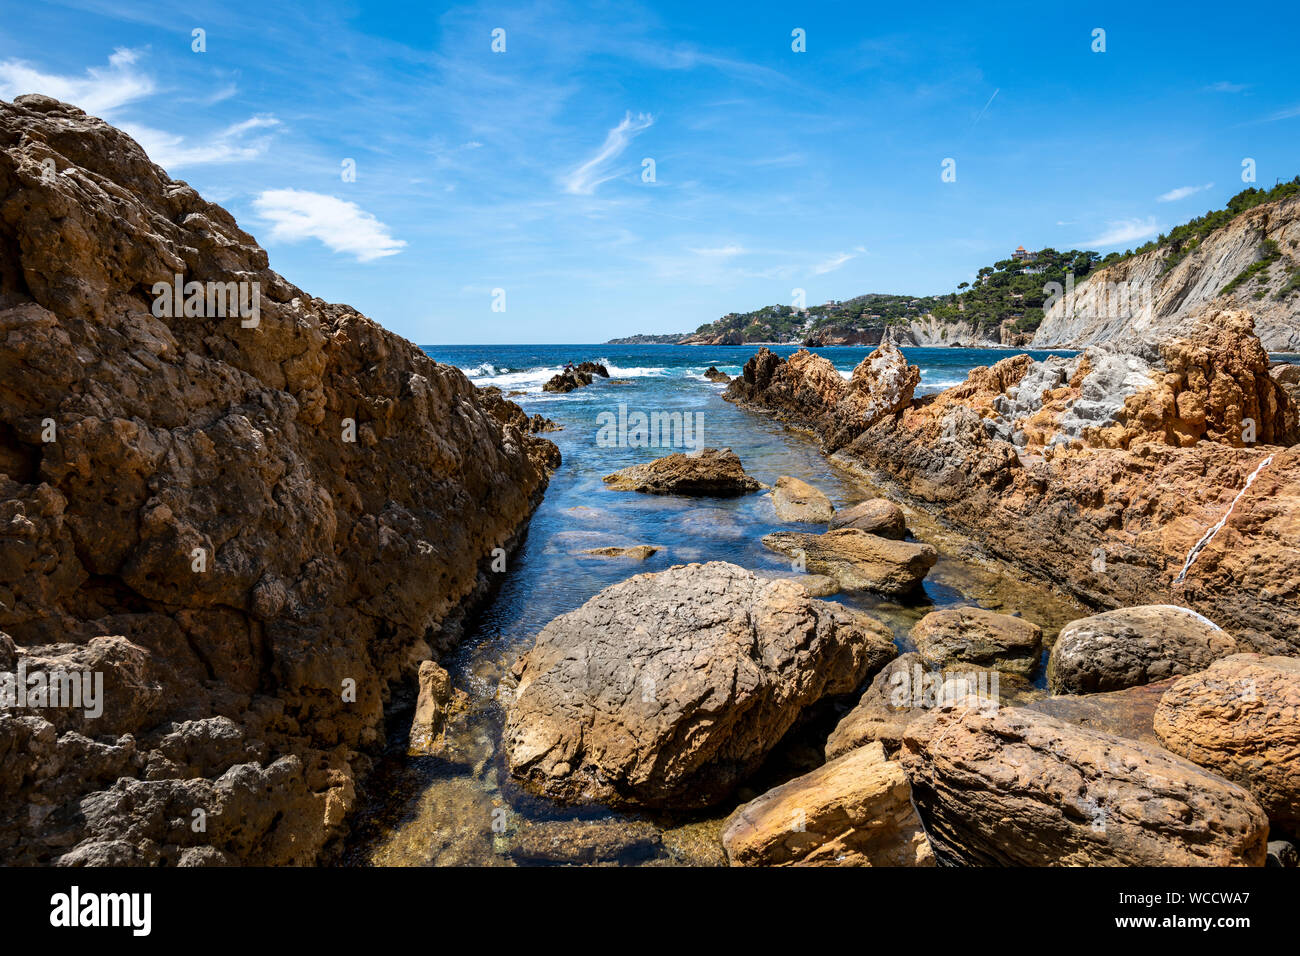 Rocky area near the Mediterranean sea at the "Calanque of Figuieres" (creek of Figuieres and Figuières Cove in Méjean), South of France, Europe Stock Photo